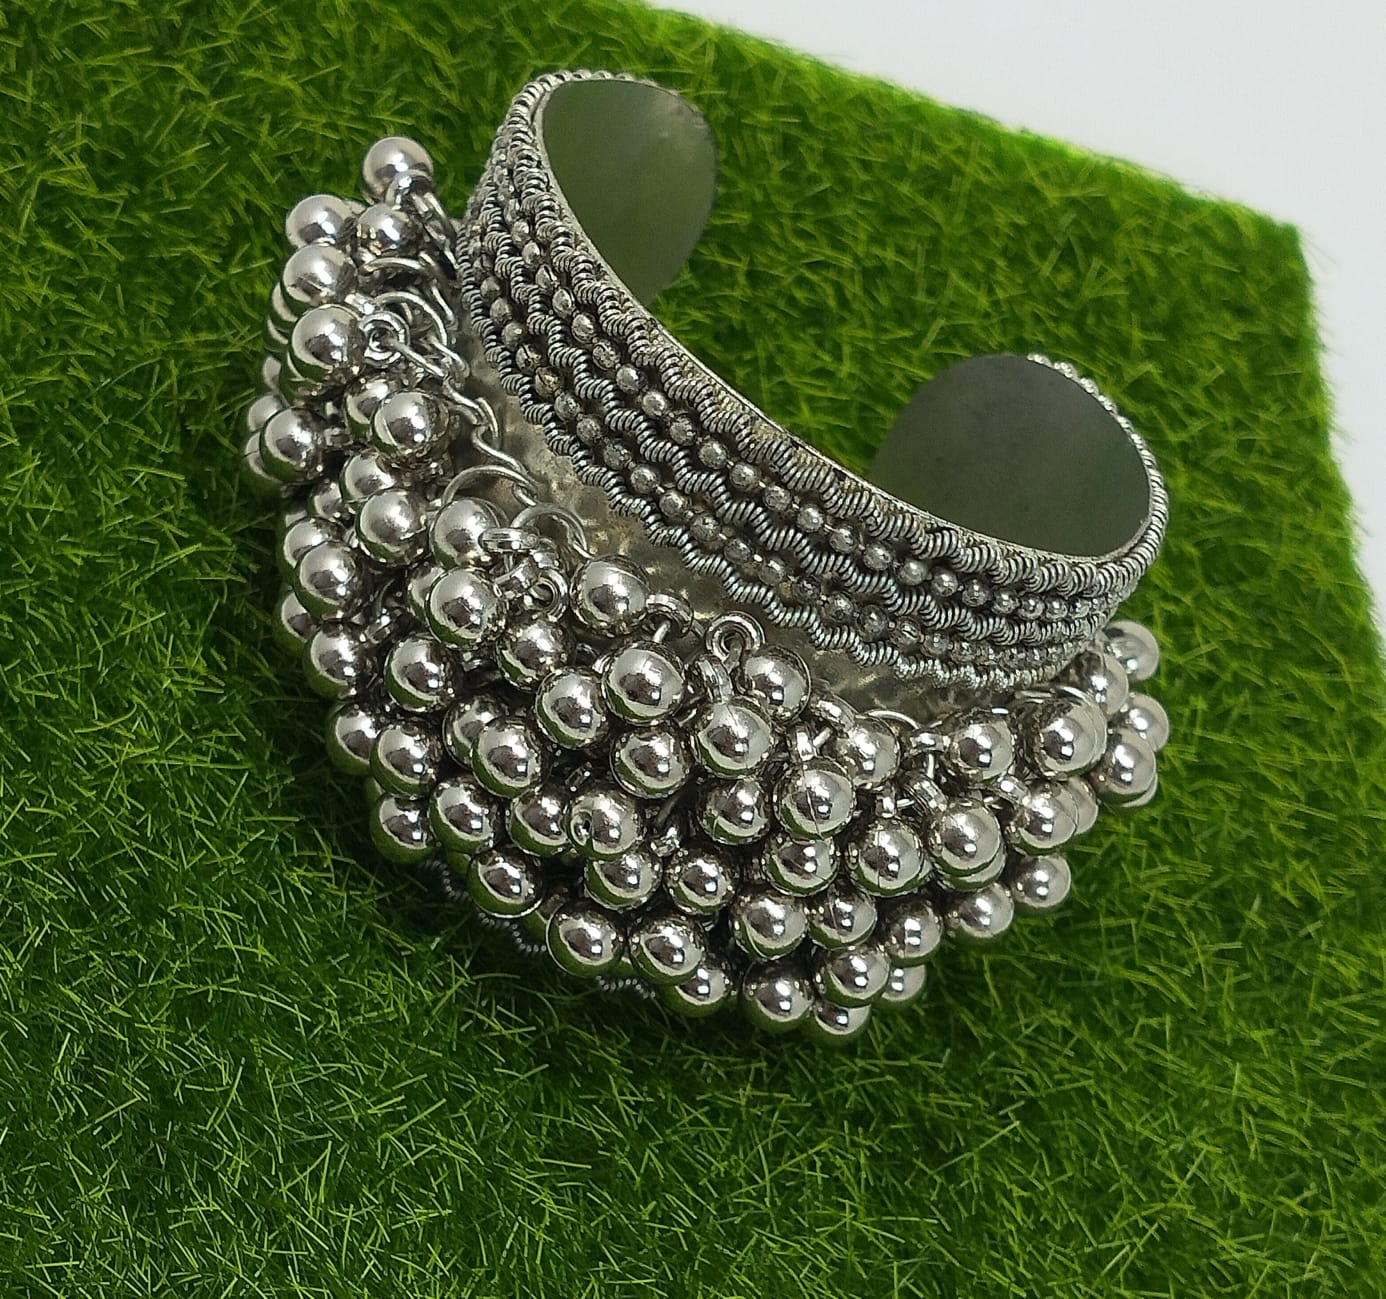 Oxidized Silver-Plated Ghungroo Handcrafted Cuff Bracelet